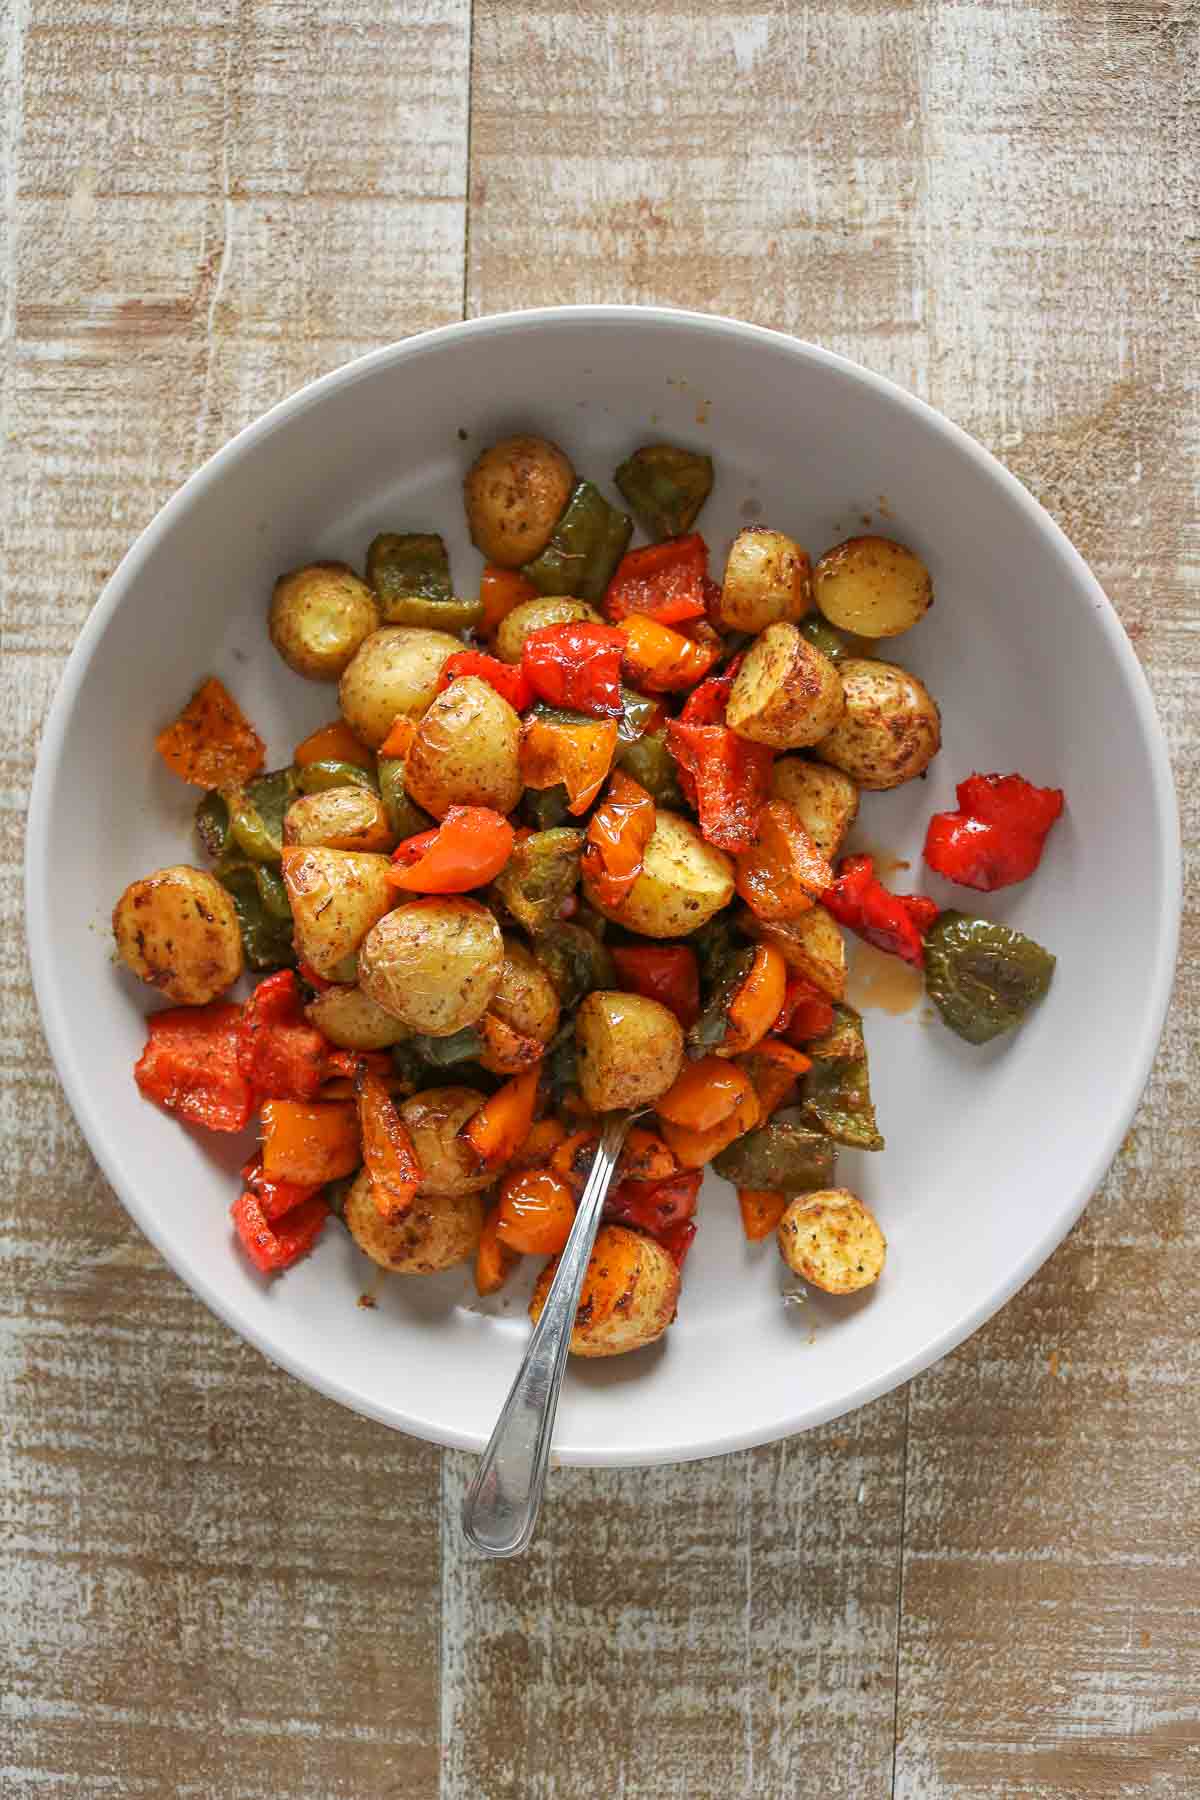 Roasted potatoes and bell peppers in a serving dish with a spoon resting in it.